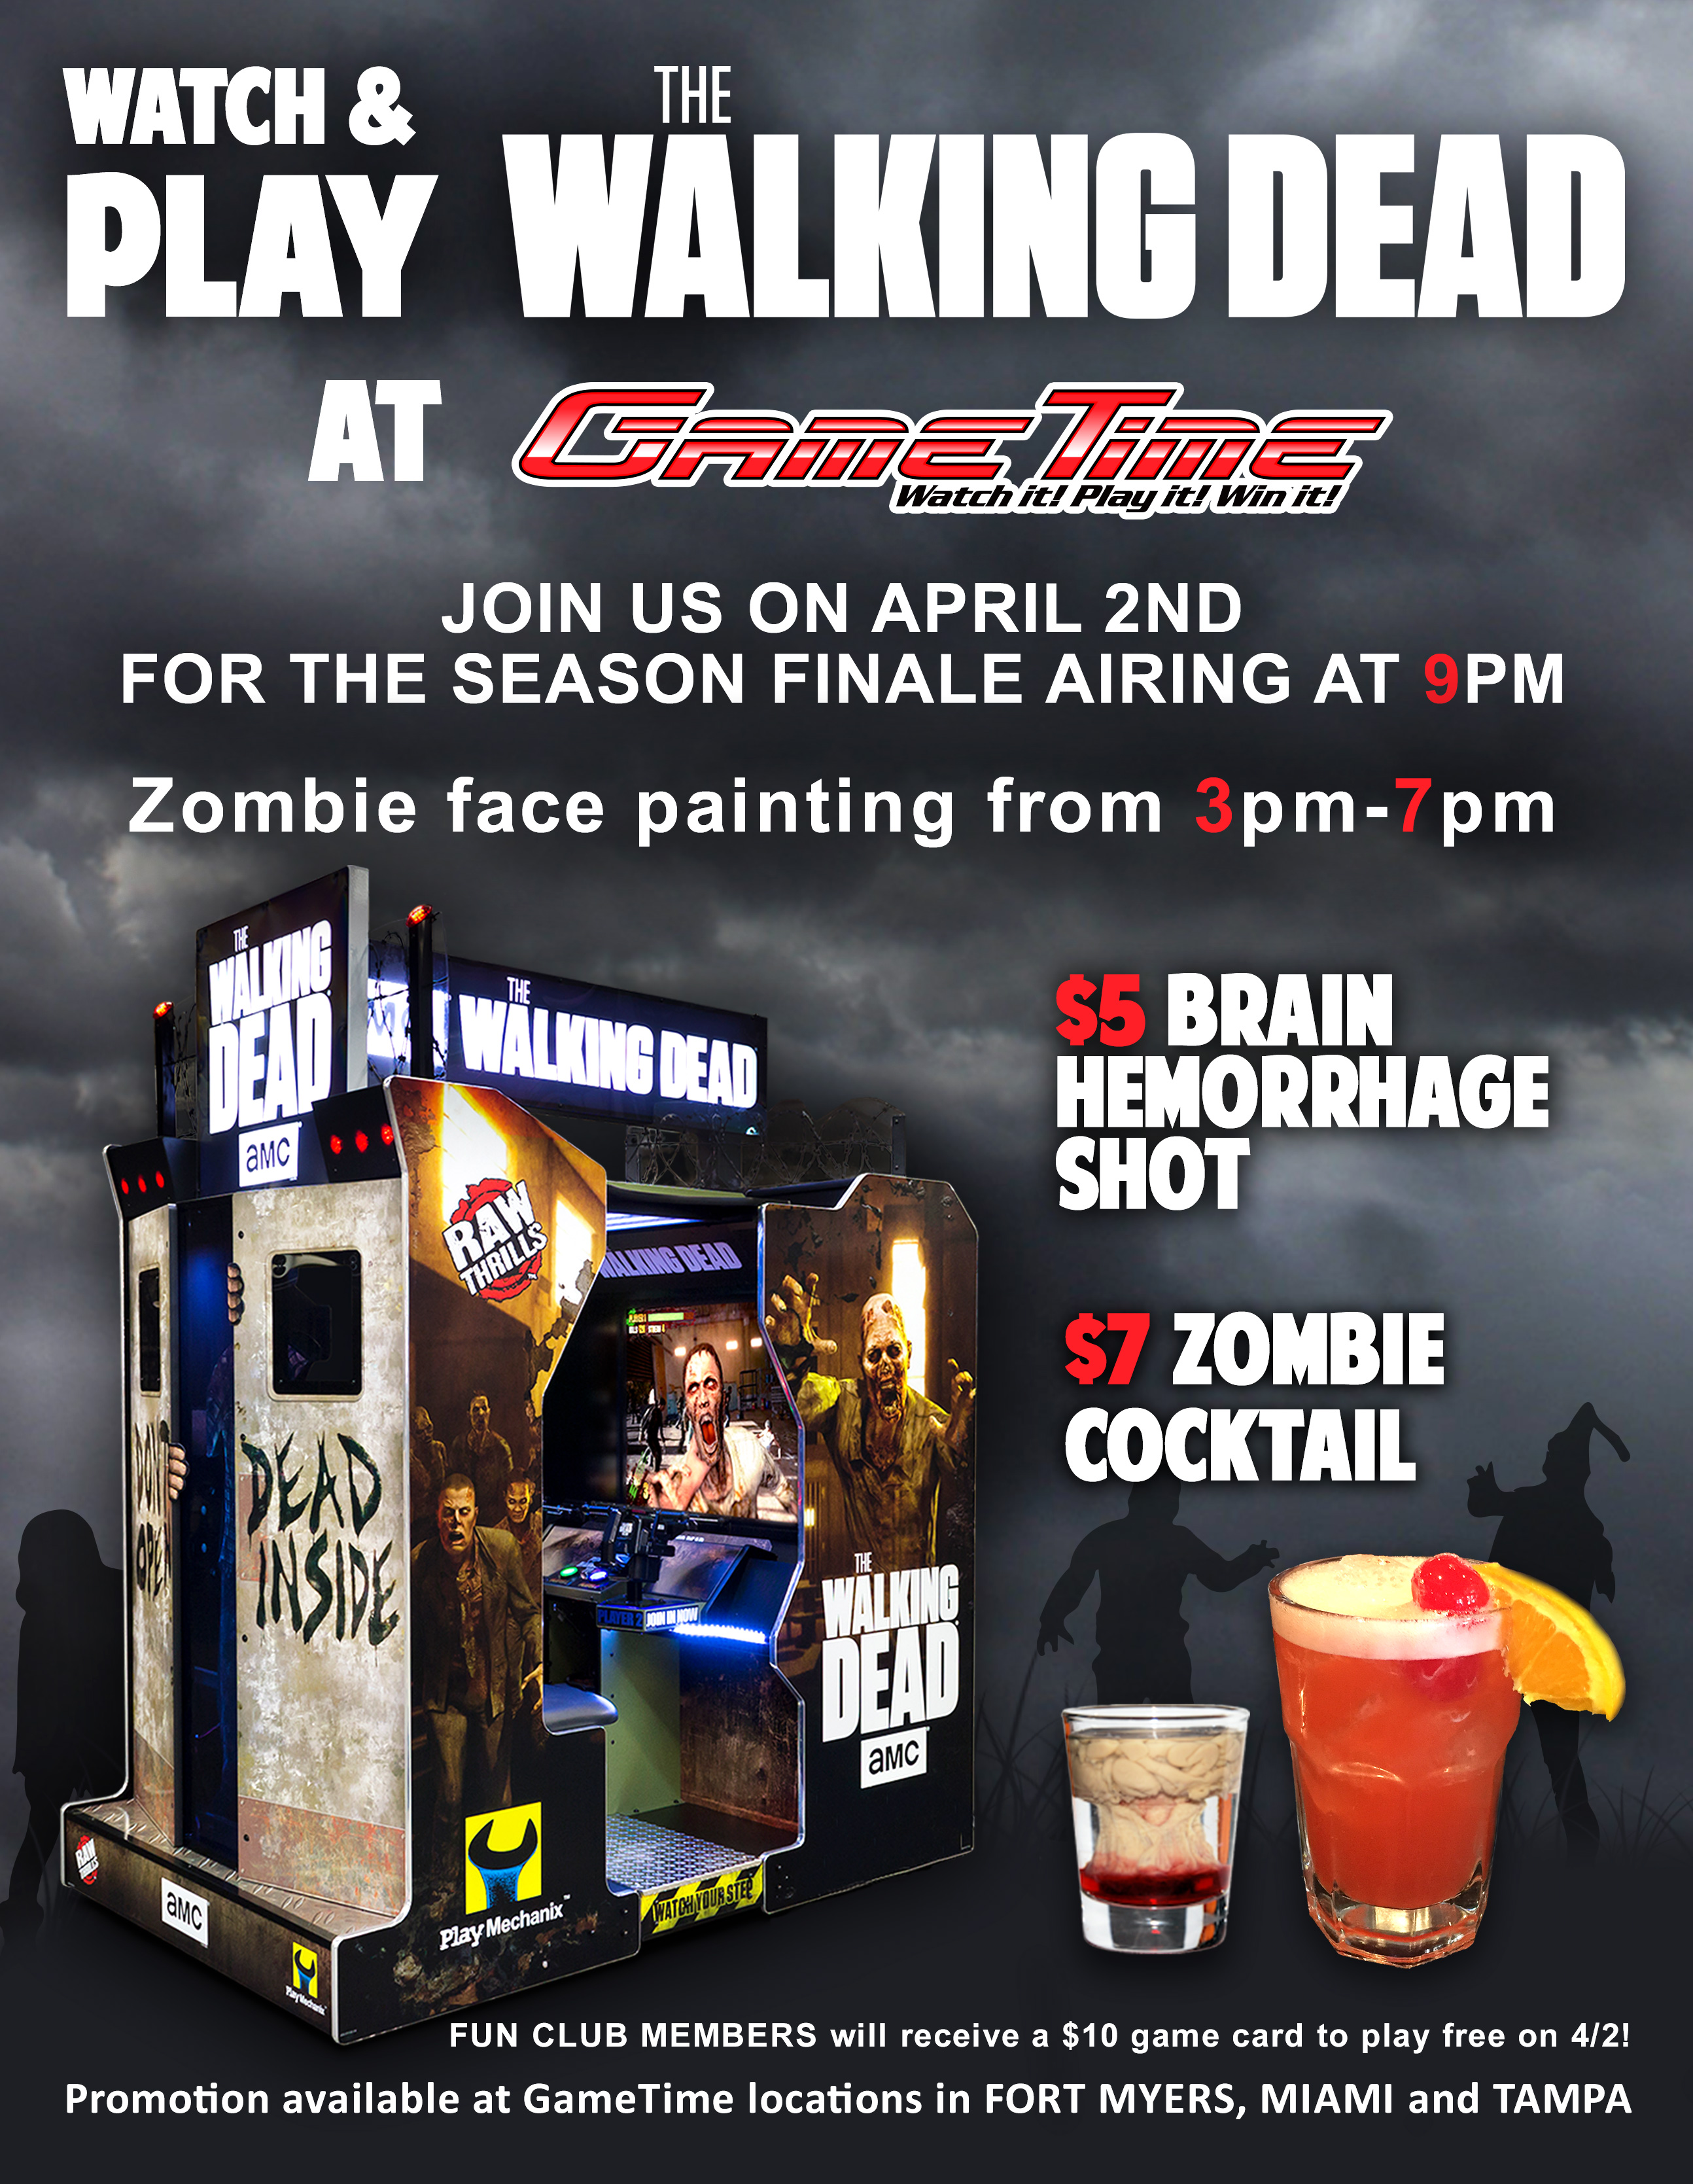 Watch & Play The Walking Dead at GameTime